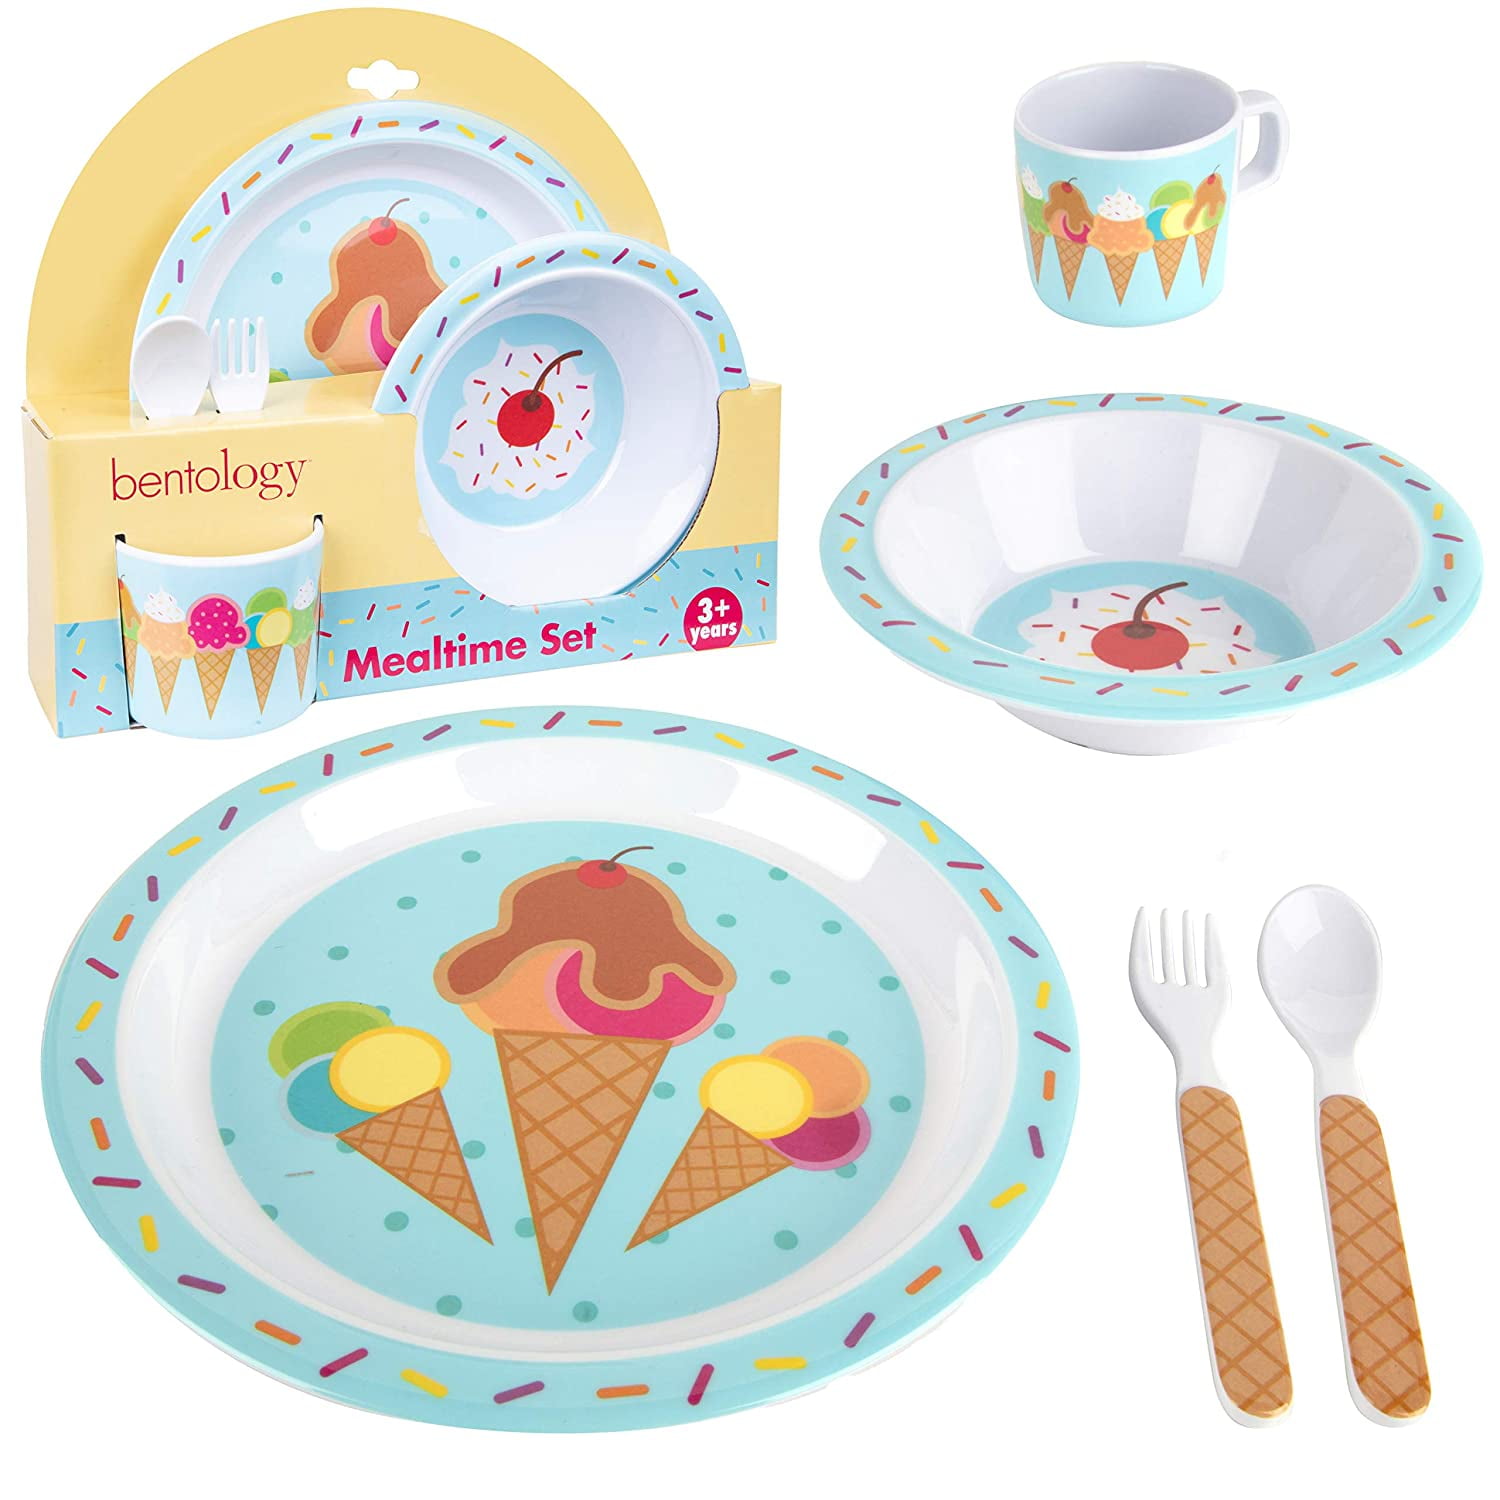 Daniel Tiger 5 Pc Mealtime Feeding Set for Kids - Plate, Bowl, Cup, Fork,  and Sp